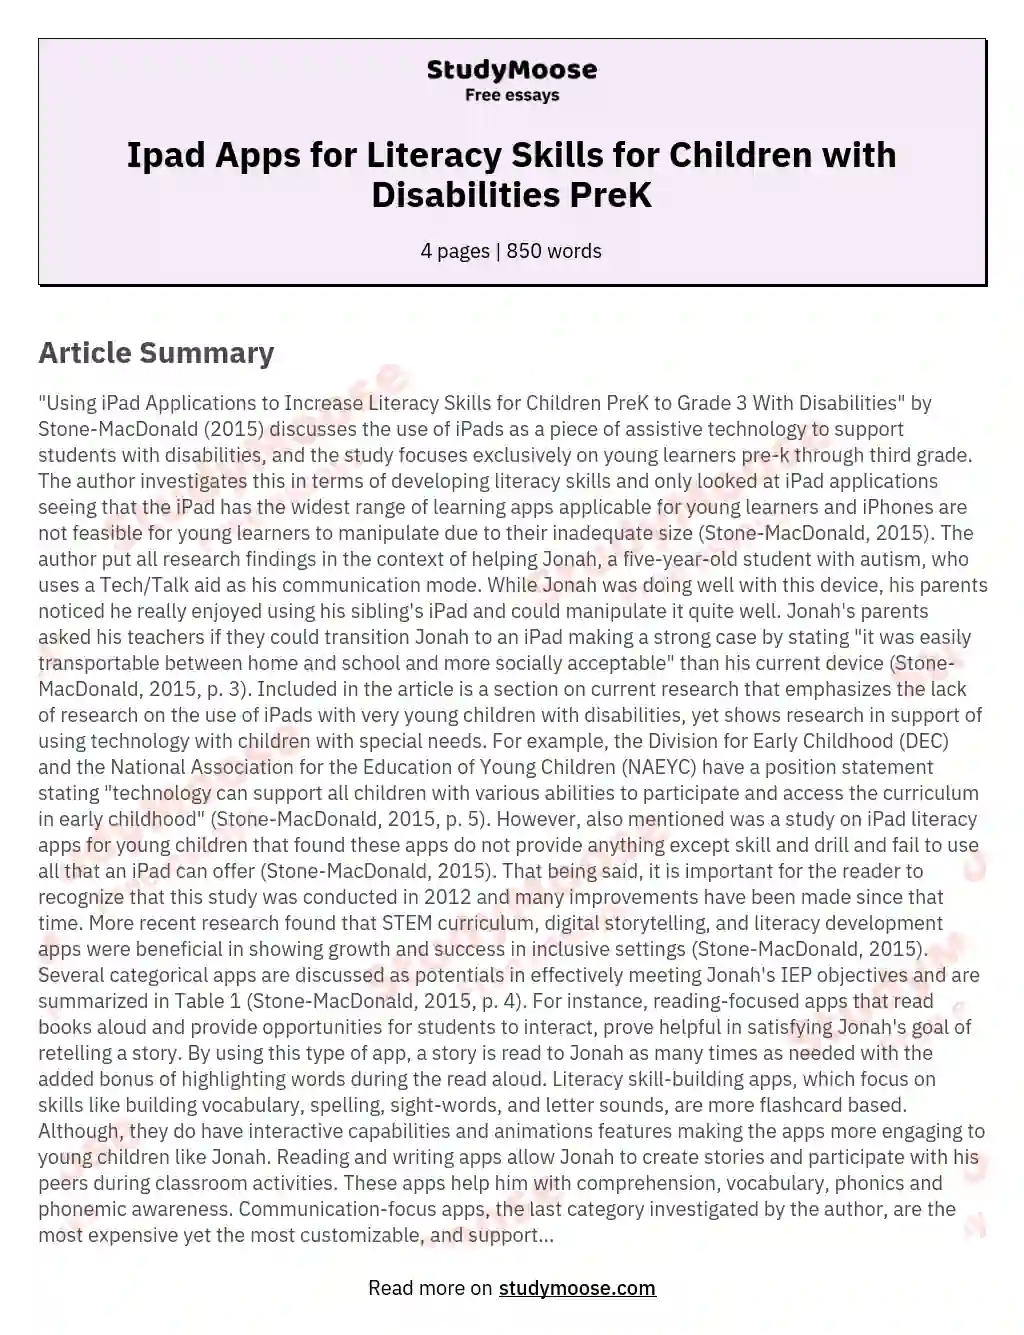 Ipad Apps for Literacy Skills for Children with Disabilities PreK essay